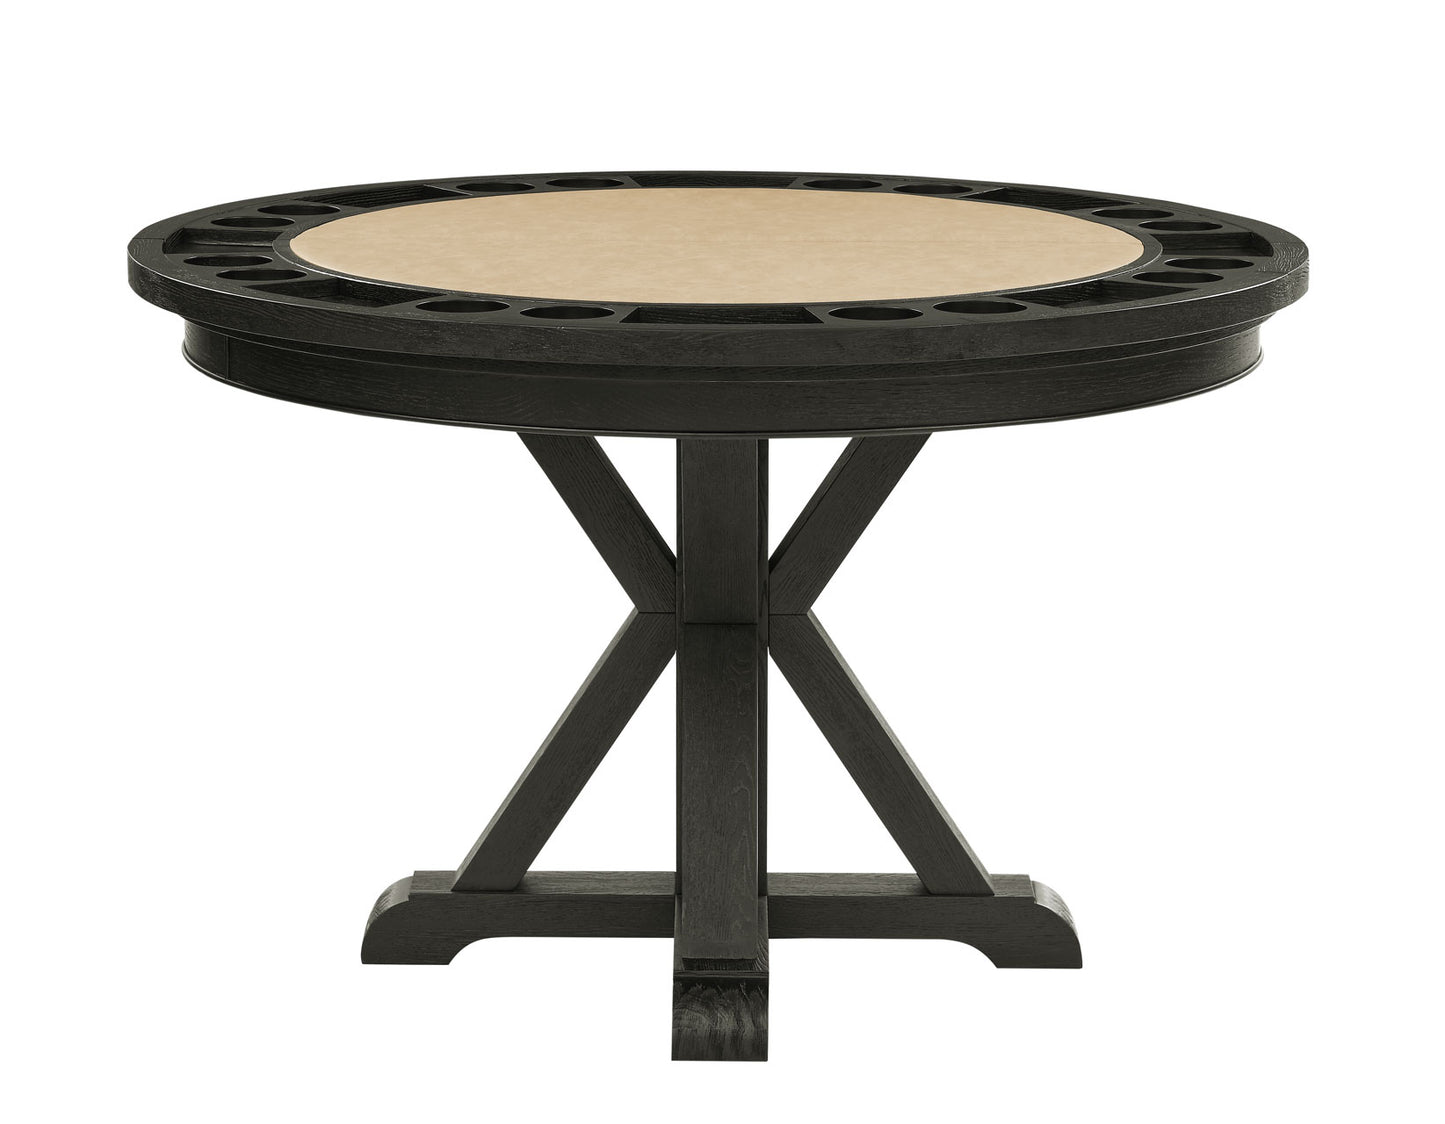 Rylie 48-inch Round Dining Table with Folding Game Top, Black Finish